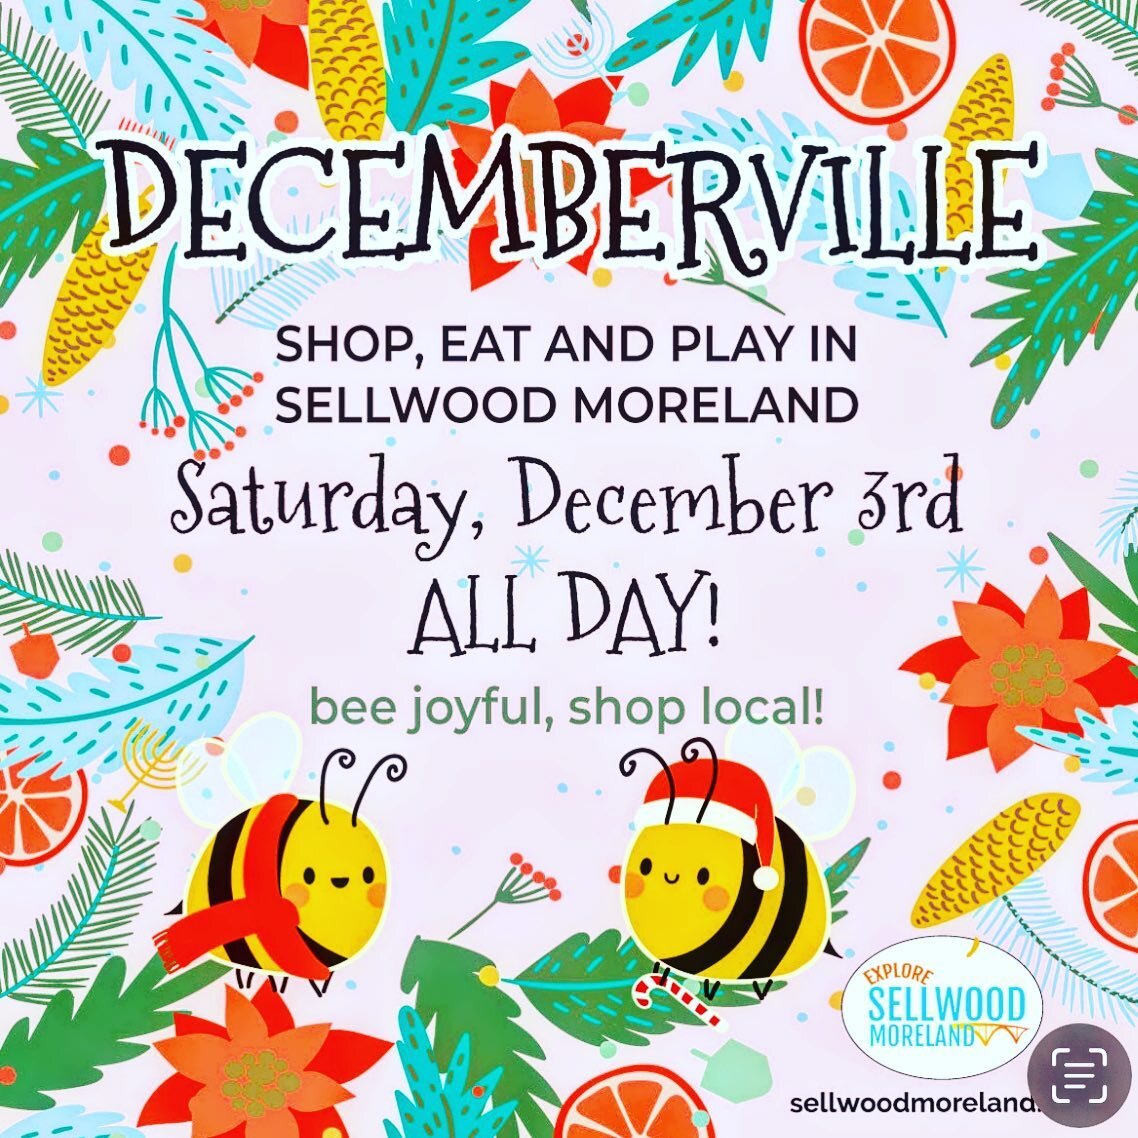 Looking forward to participating in #decemberville tomorrow!! 🥂🥳Tonight will be business as usual, so c&rsquo;mon by and say hi, grab some wine, check out our cool and new holiday merch, put together a gift basket, say hi to Baby T, dance a little!